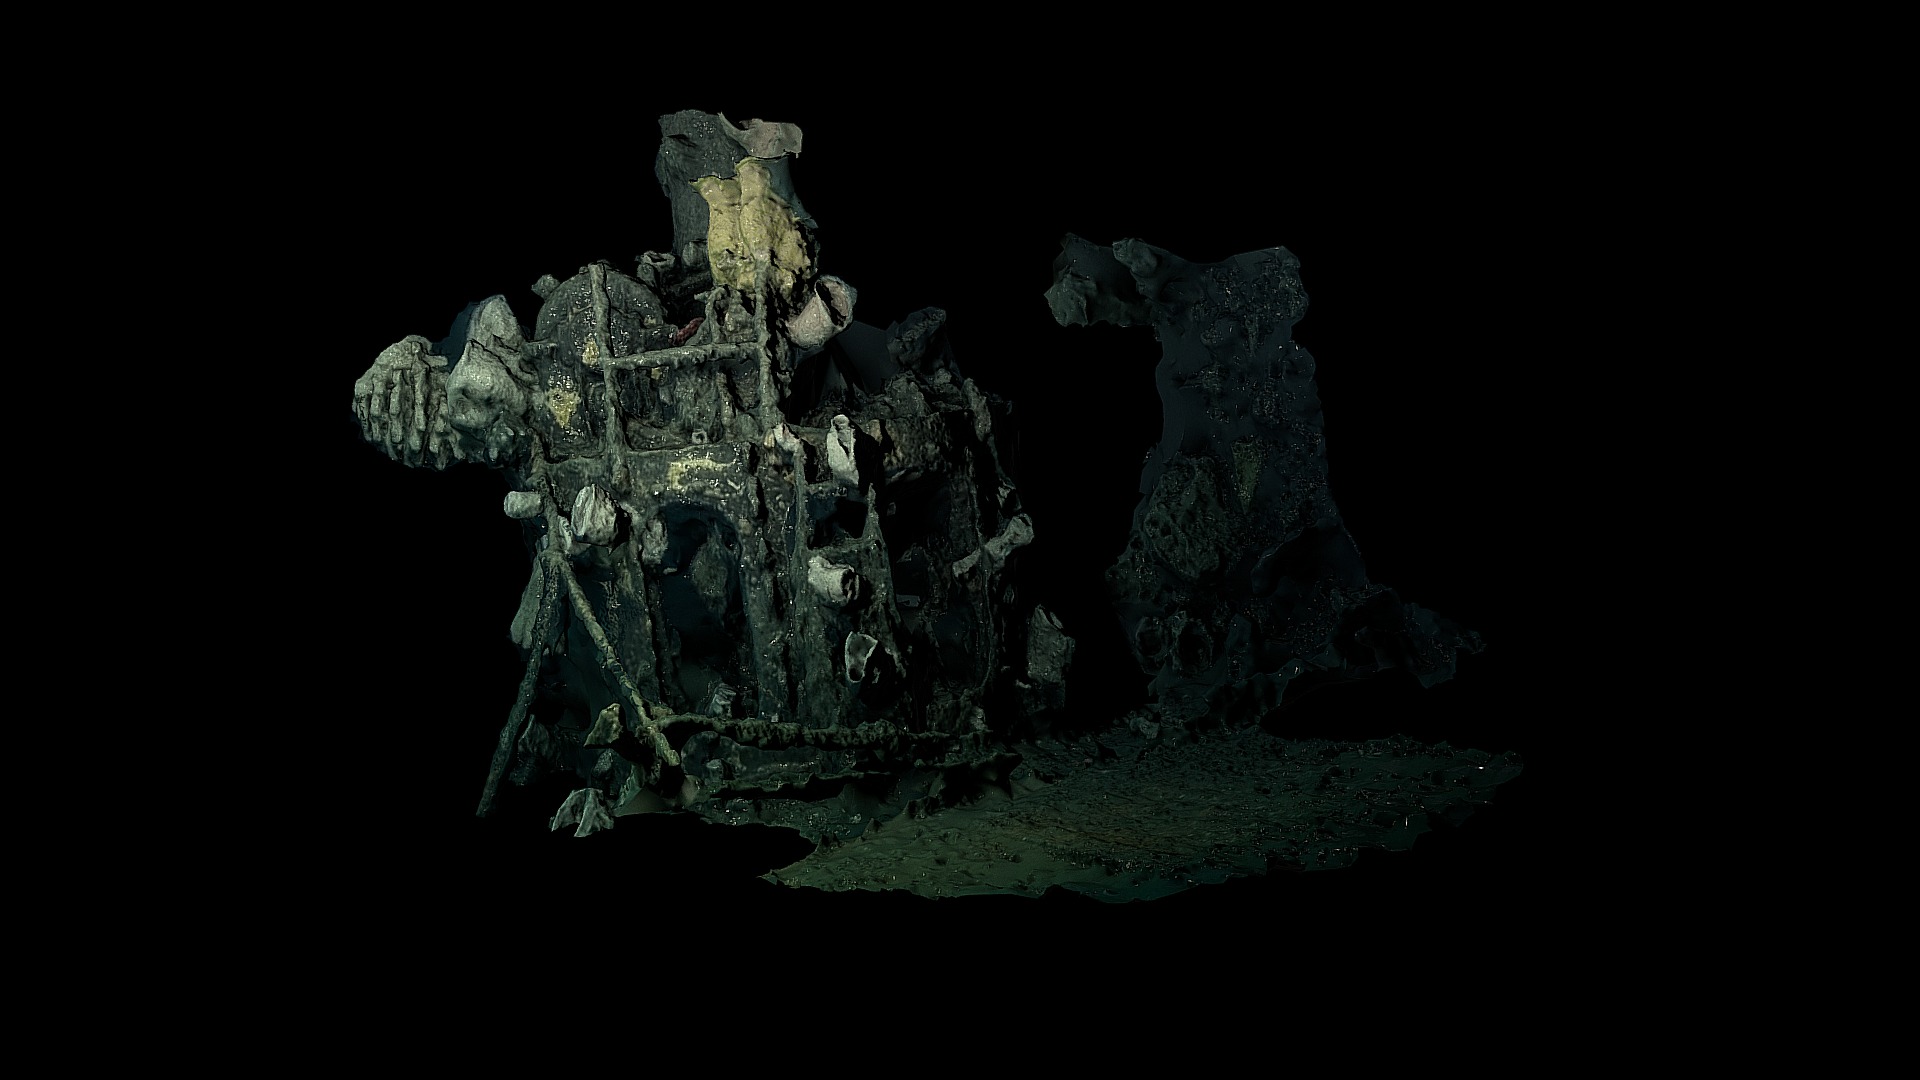 3D model Low Poly Deep Sea Shipwreck #1 - This is a 3D model of the Low Poly Deep Sea Shipwreck #1. The 3D model is about a rock formation with a dark background.